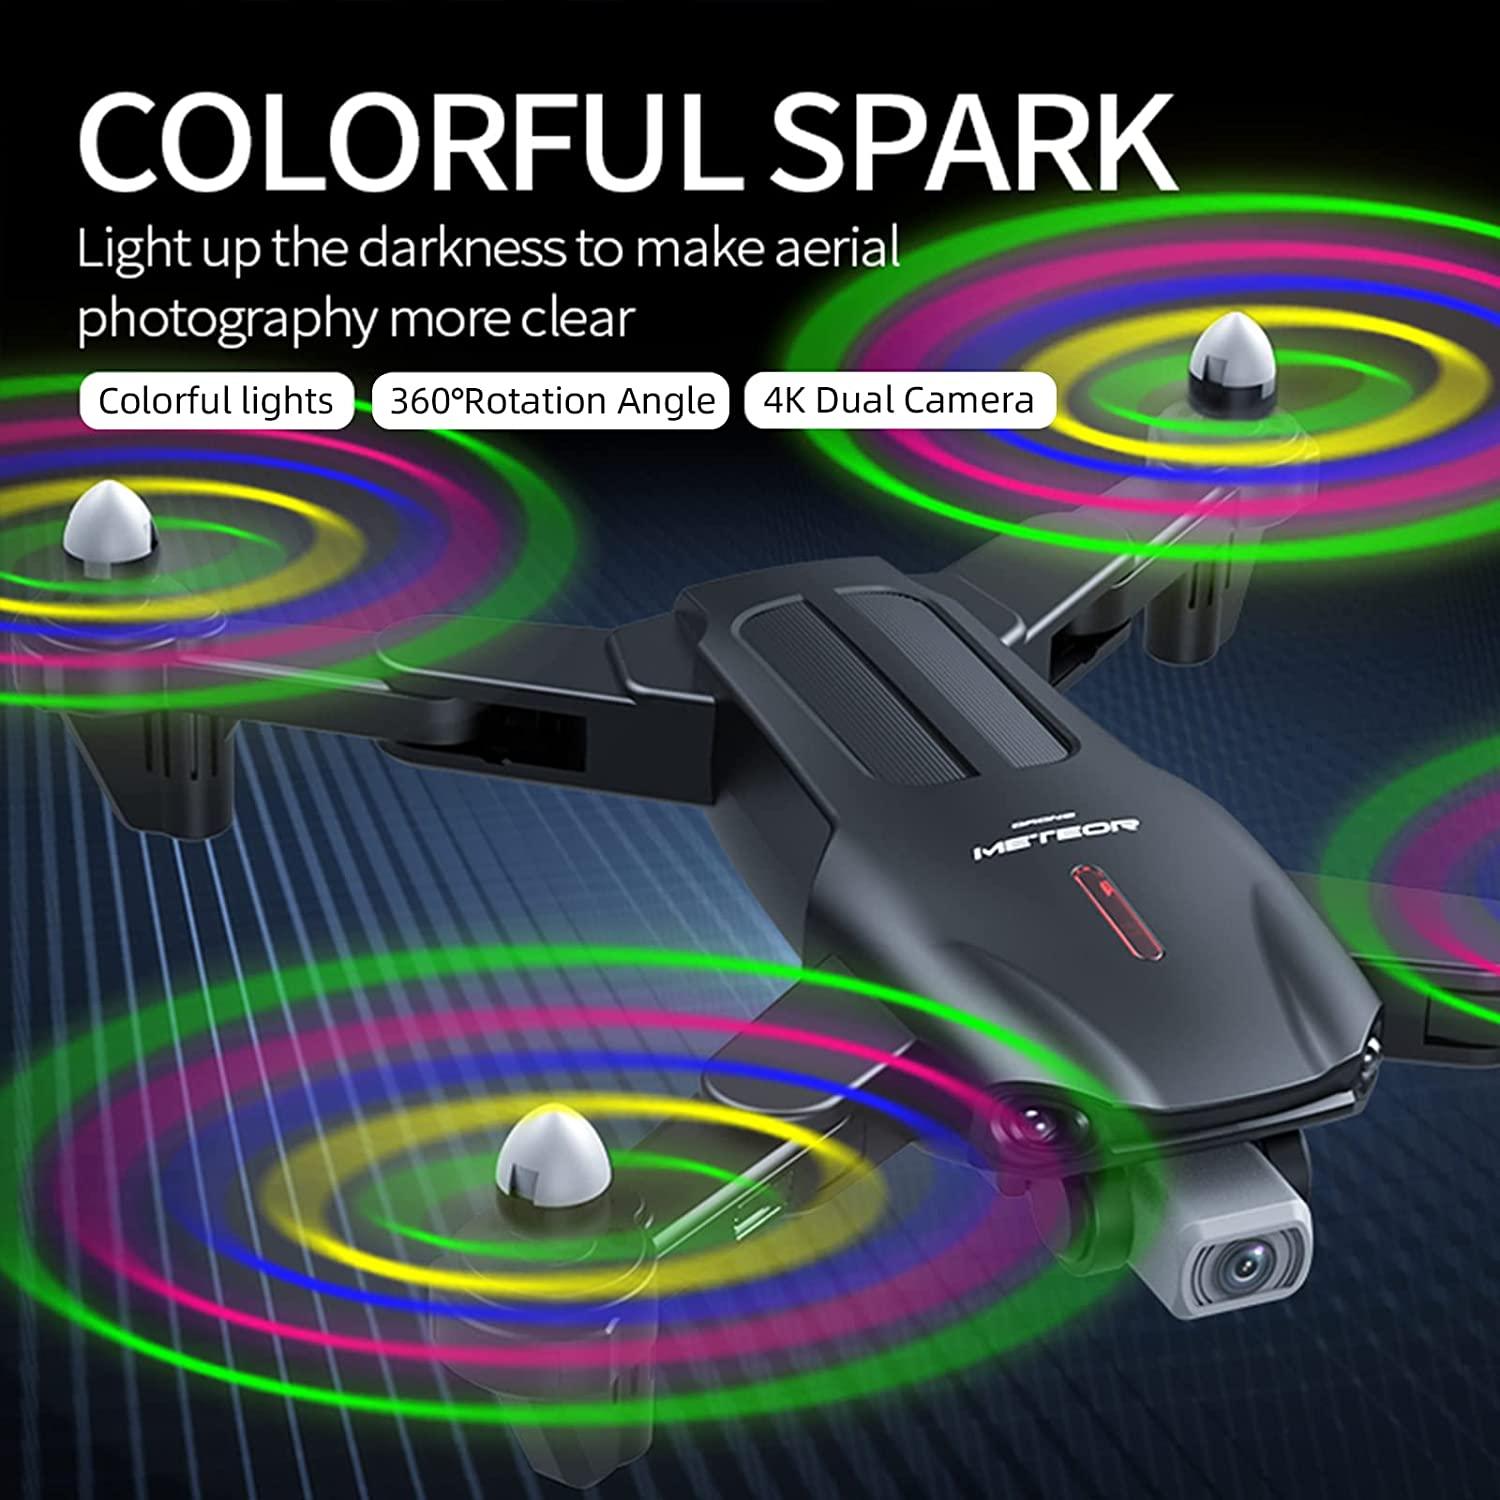 NiGHT LiONS TECH RC Drones for Kids Adults beginner with Camera 1080P,WiFi FPV Remote Control Quadcopter with RGB LED Lights,Optical flow,3D Flip,Headless Mode,One Key Start Mode,2 Battery - RCDrone